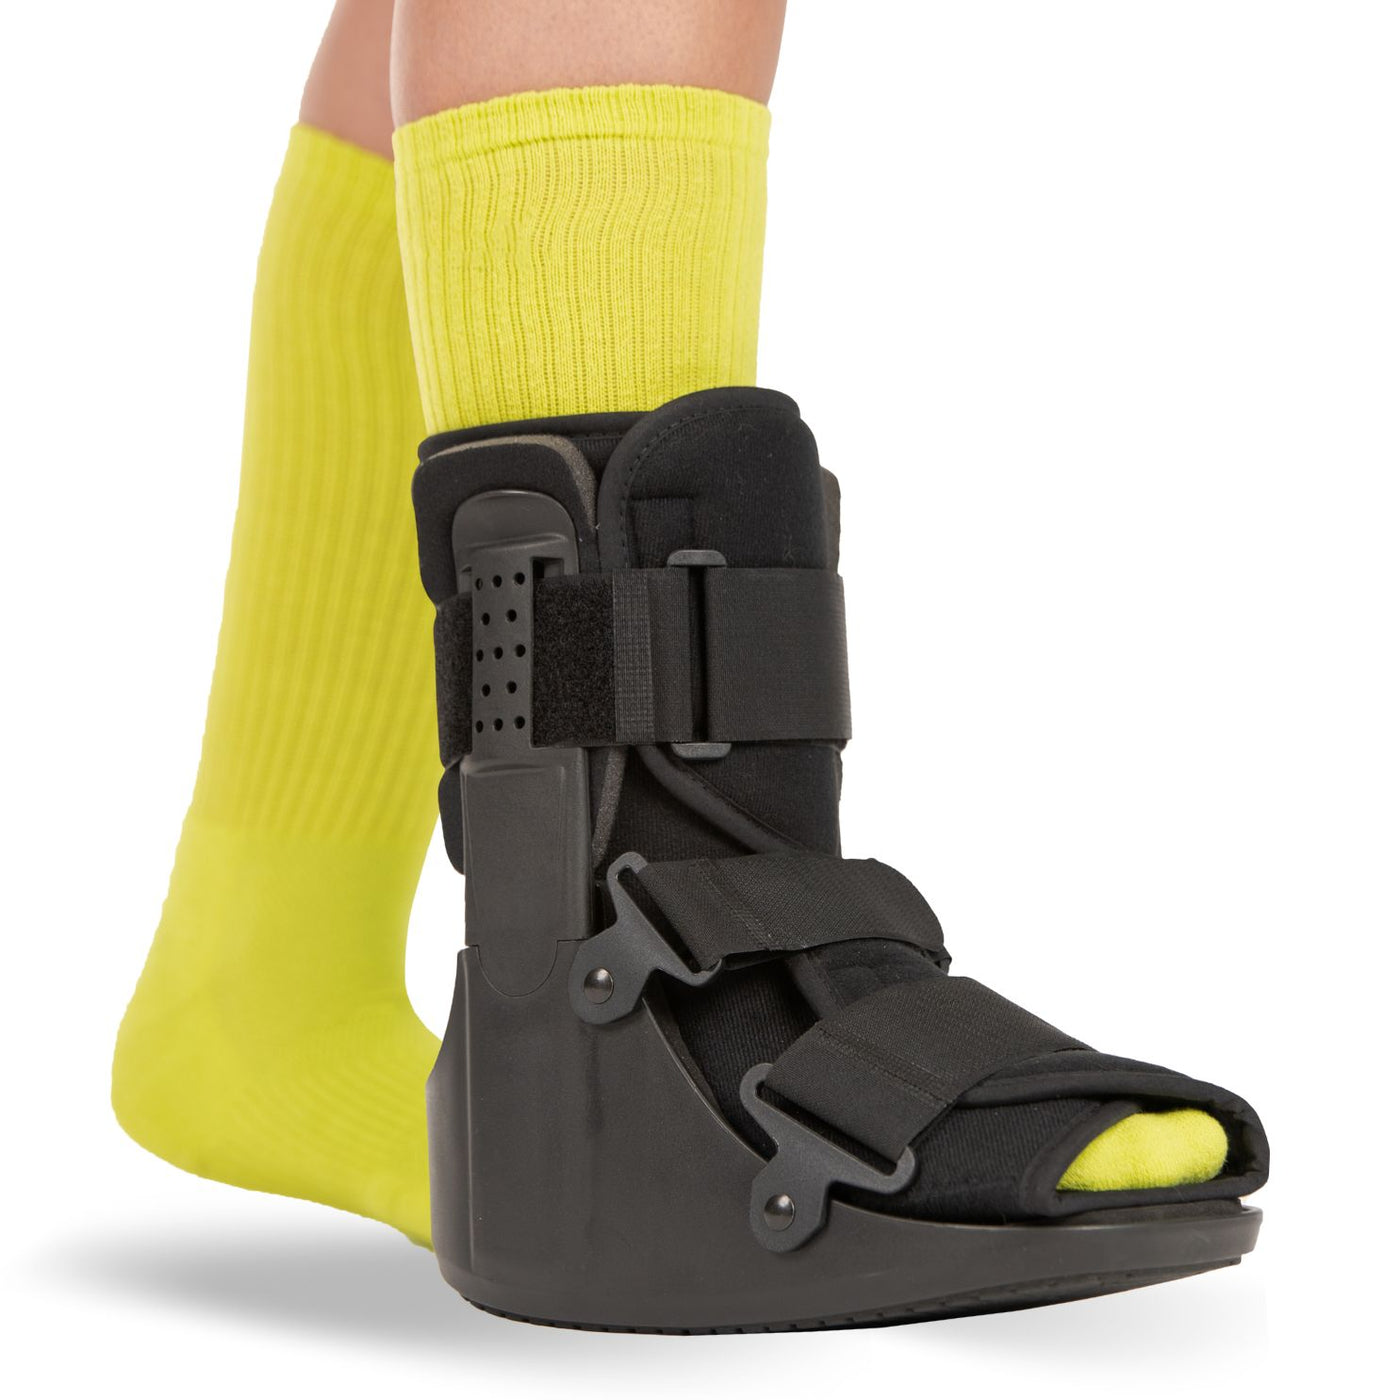 Metatarsal stress fracture foot brace and walking boot